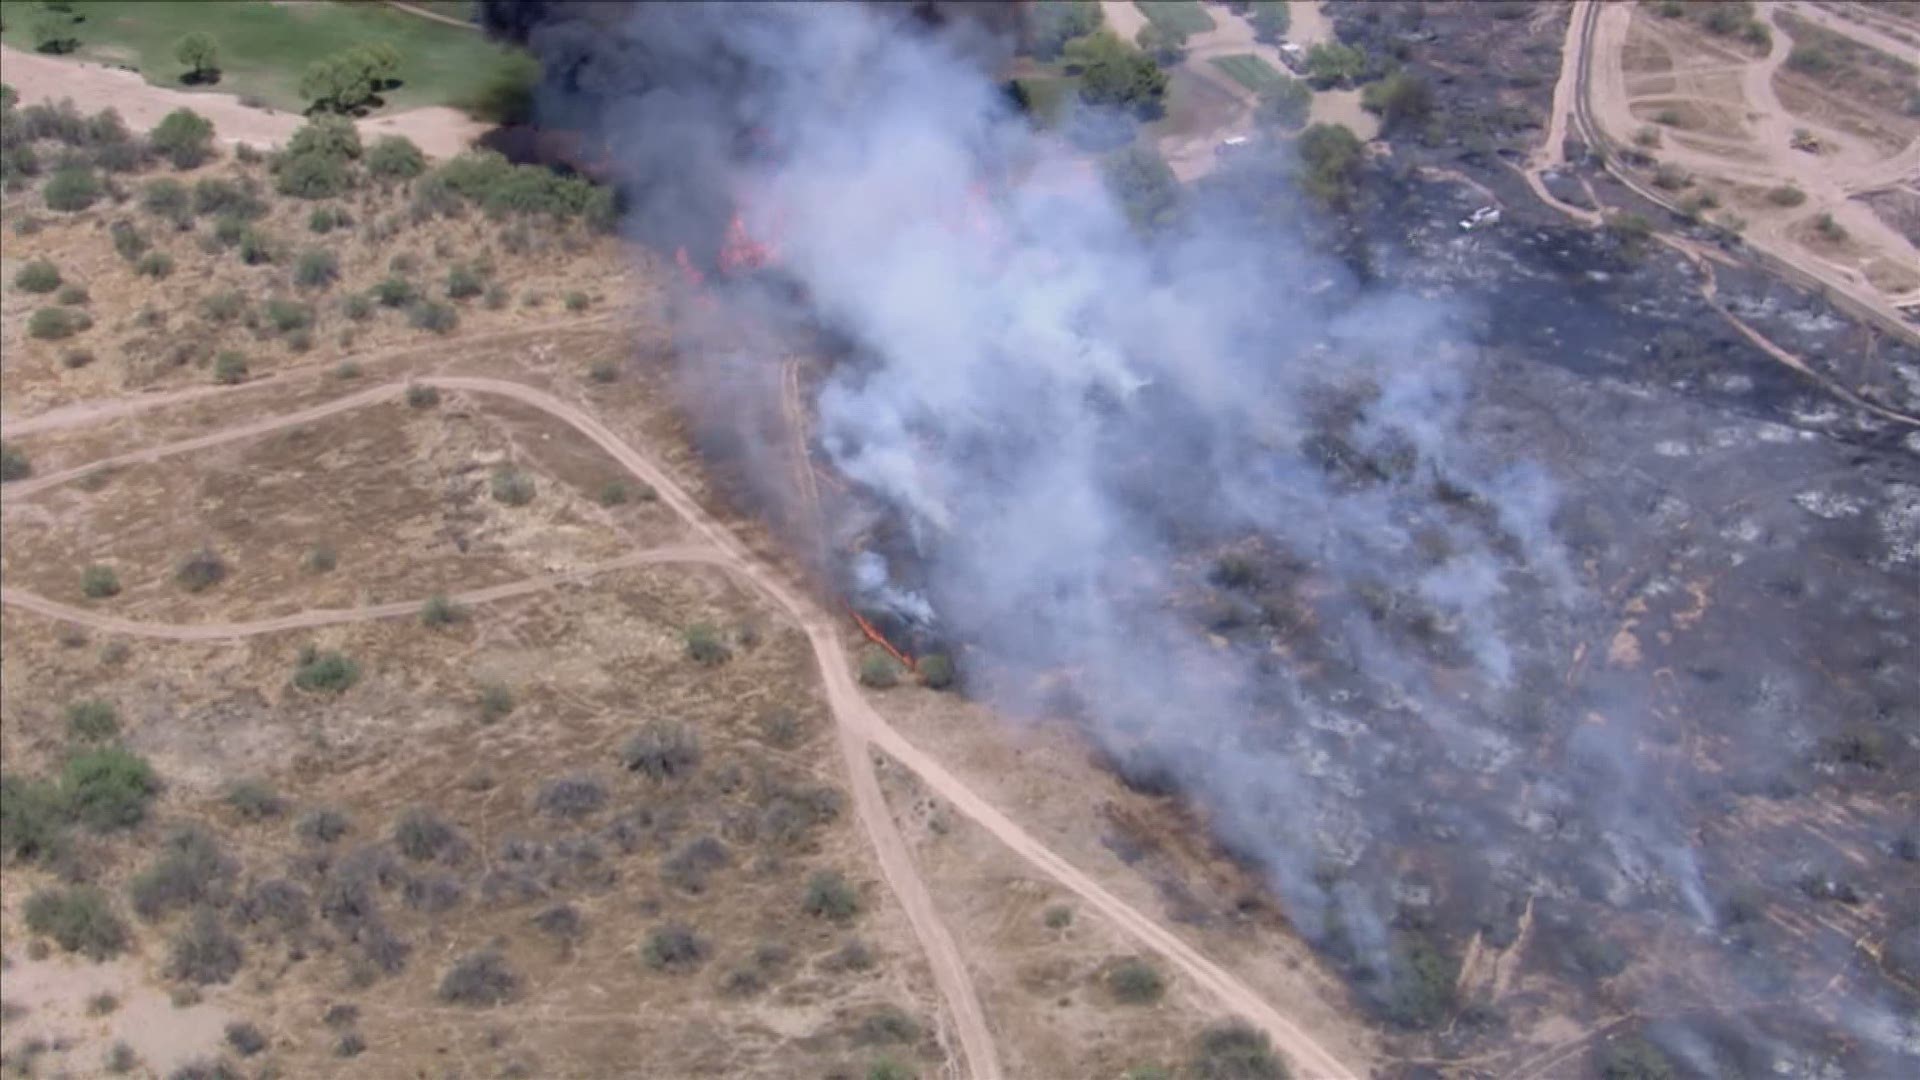 The brush fire started around noon on Tuesday near 43rd Avenue and Ultra Light Lane according to the Phoenix Fire Department.